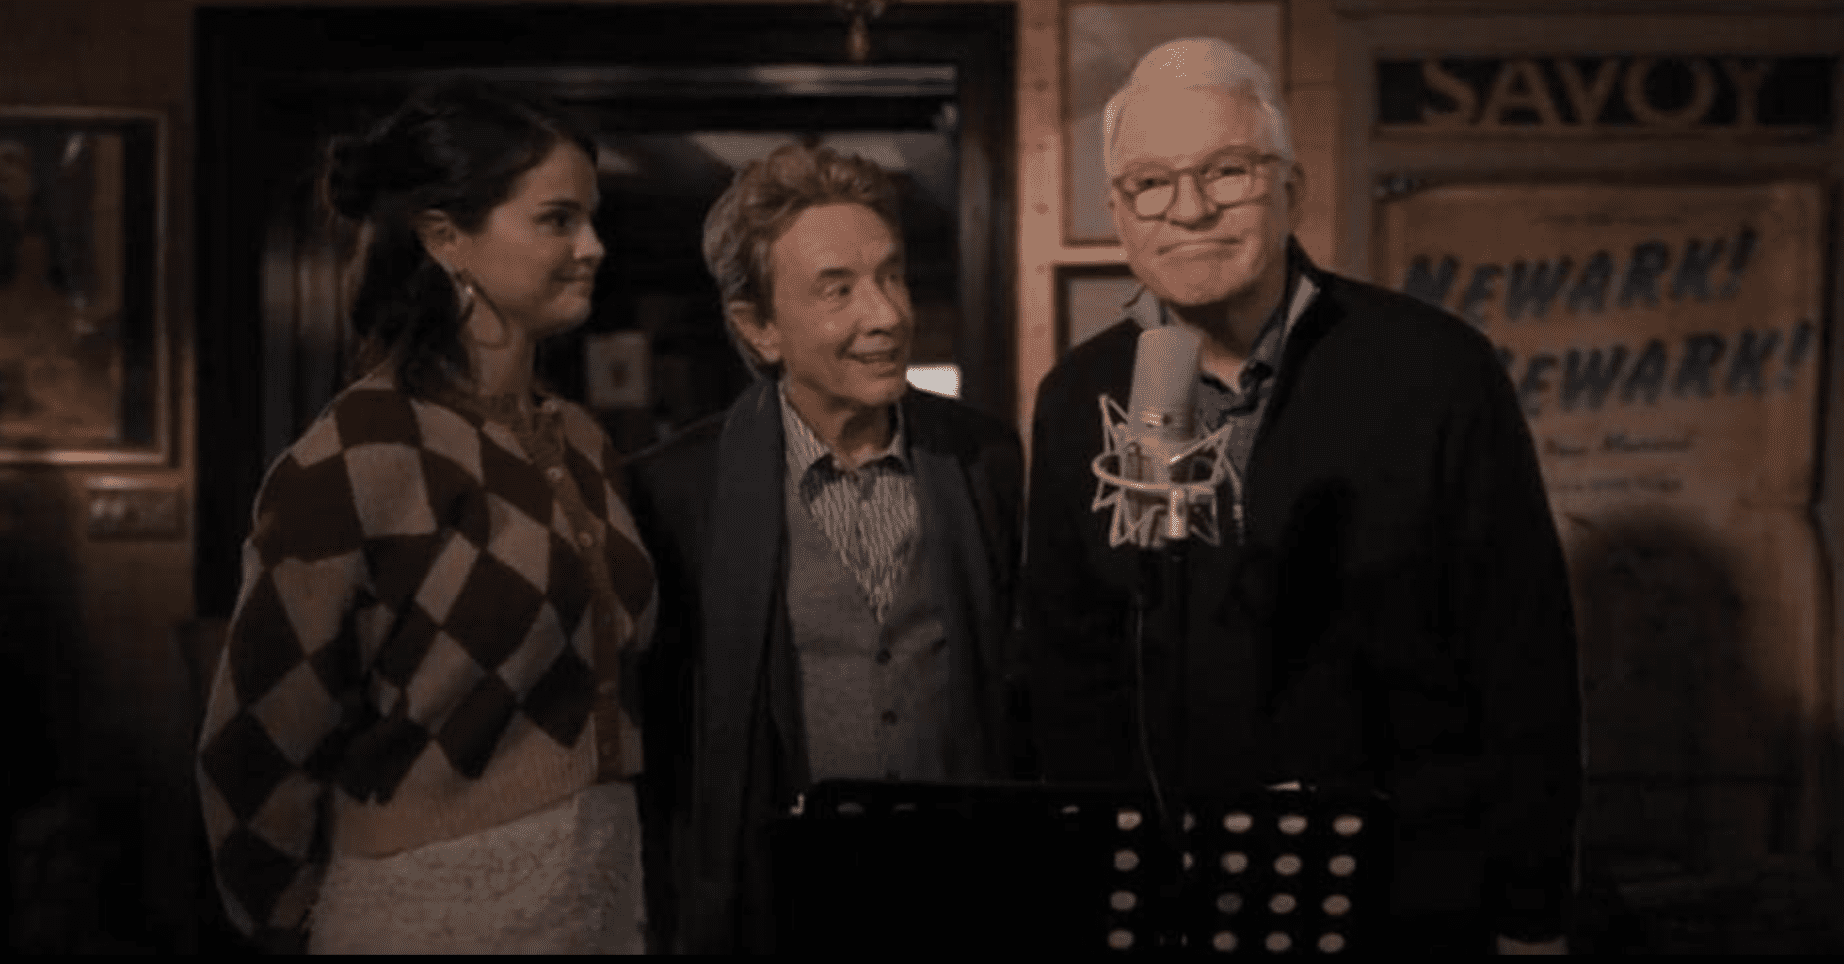 Steve Martin talks into a microphone as Selena Gomez and Martin Short observe closely.